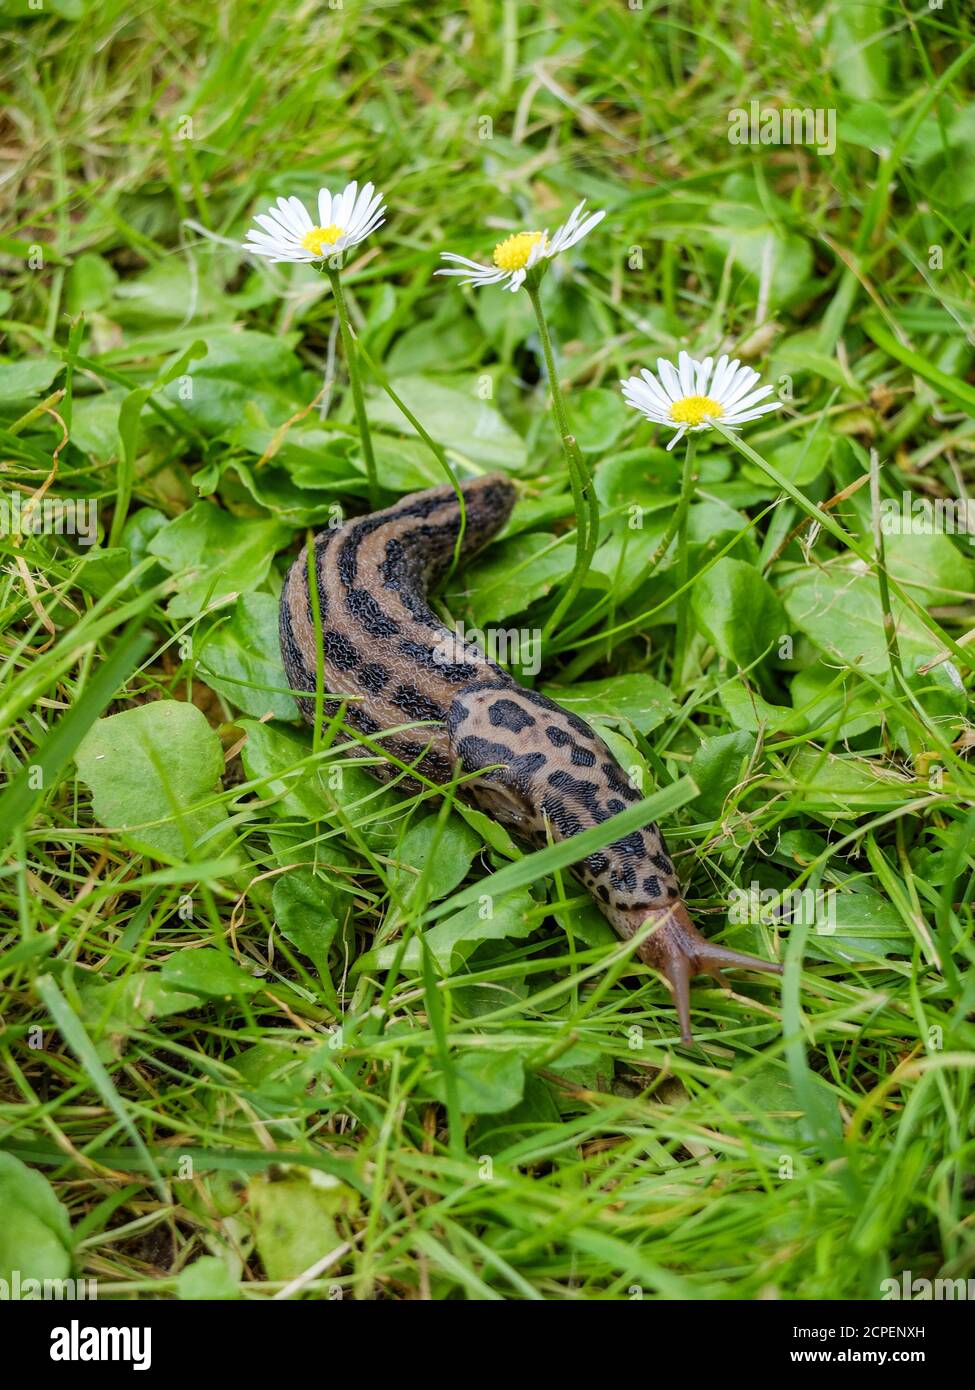 Tiger snail snails (Limax maximus) in the grass between daisies Stock Photo